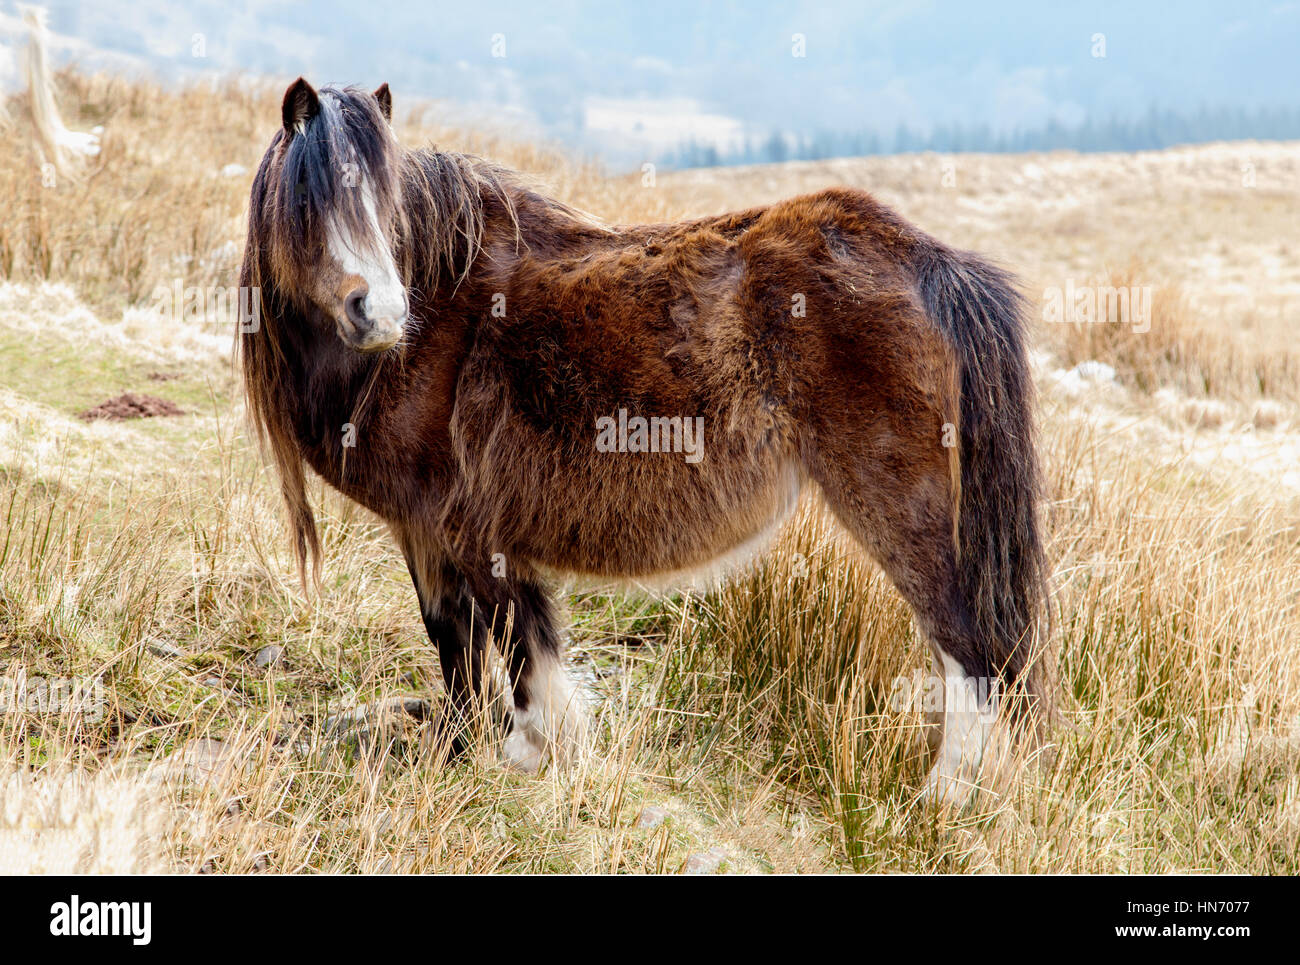 A WELSH MOUNTAIN PONy or cob on a snow covered hillside in the Brecon Beacons national park Stock Photo